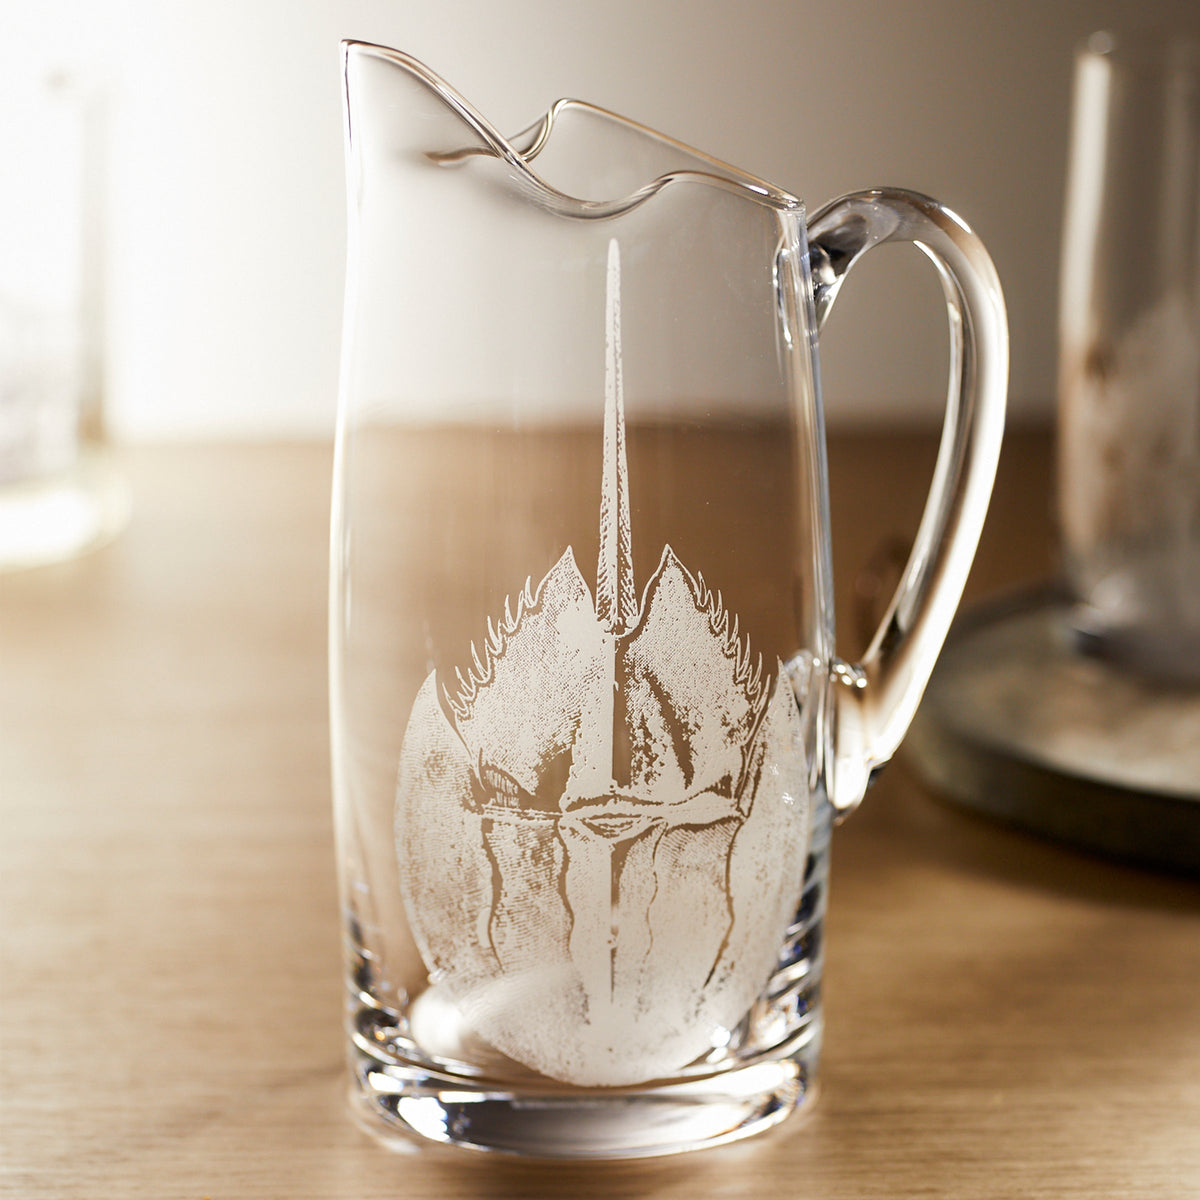 A Horseshoe Crab Small Pitcher by Caskata with an engraved design on it.